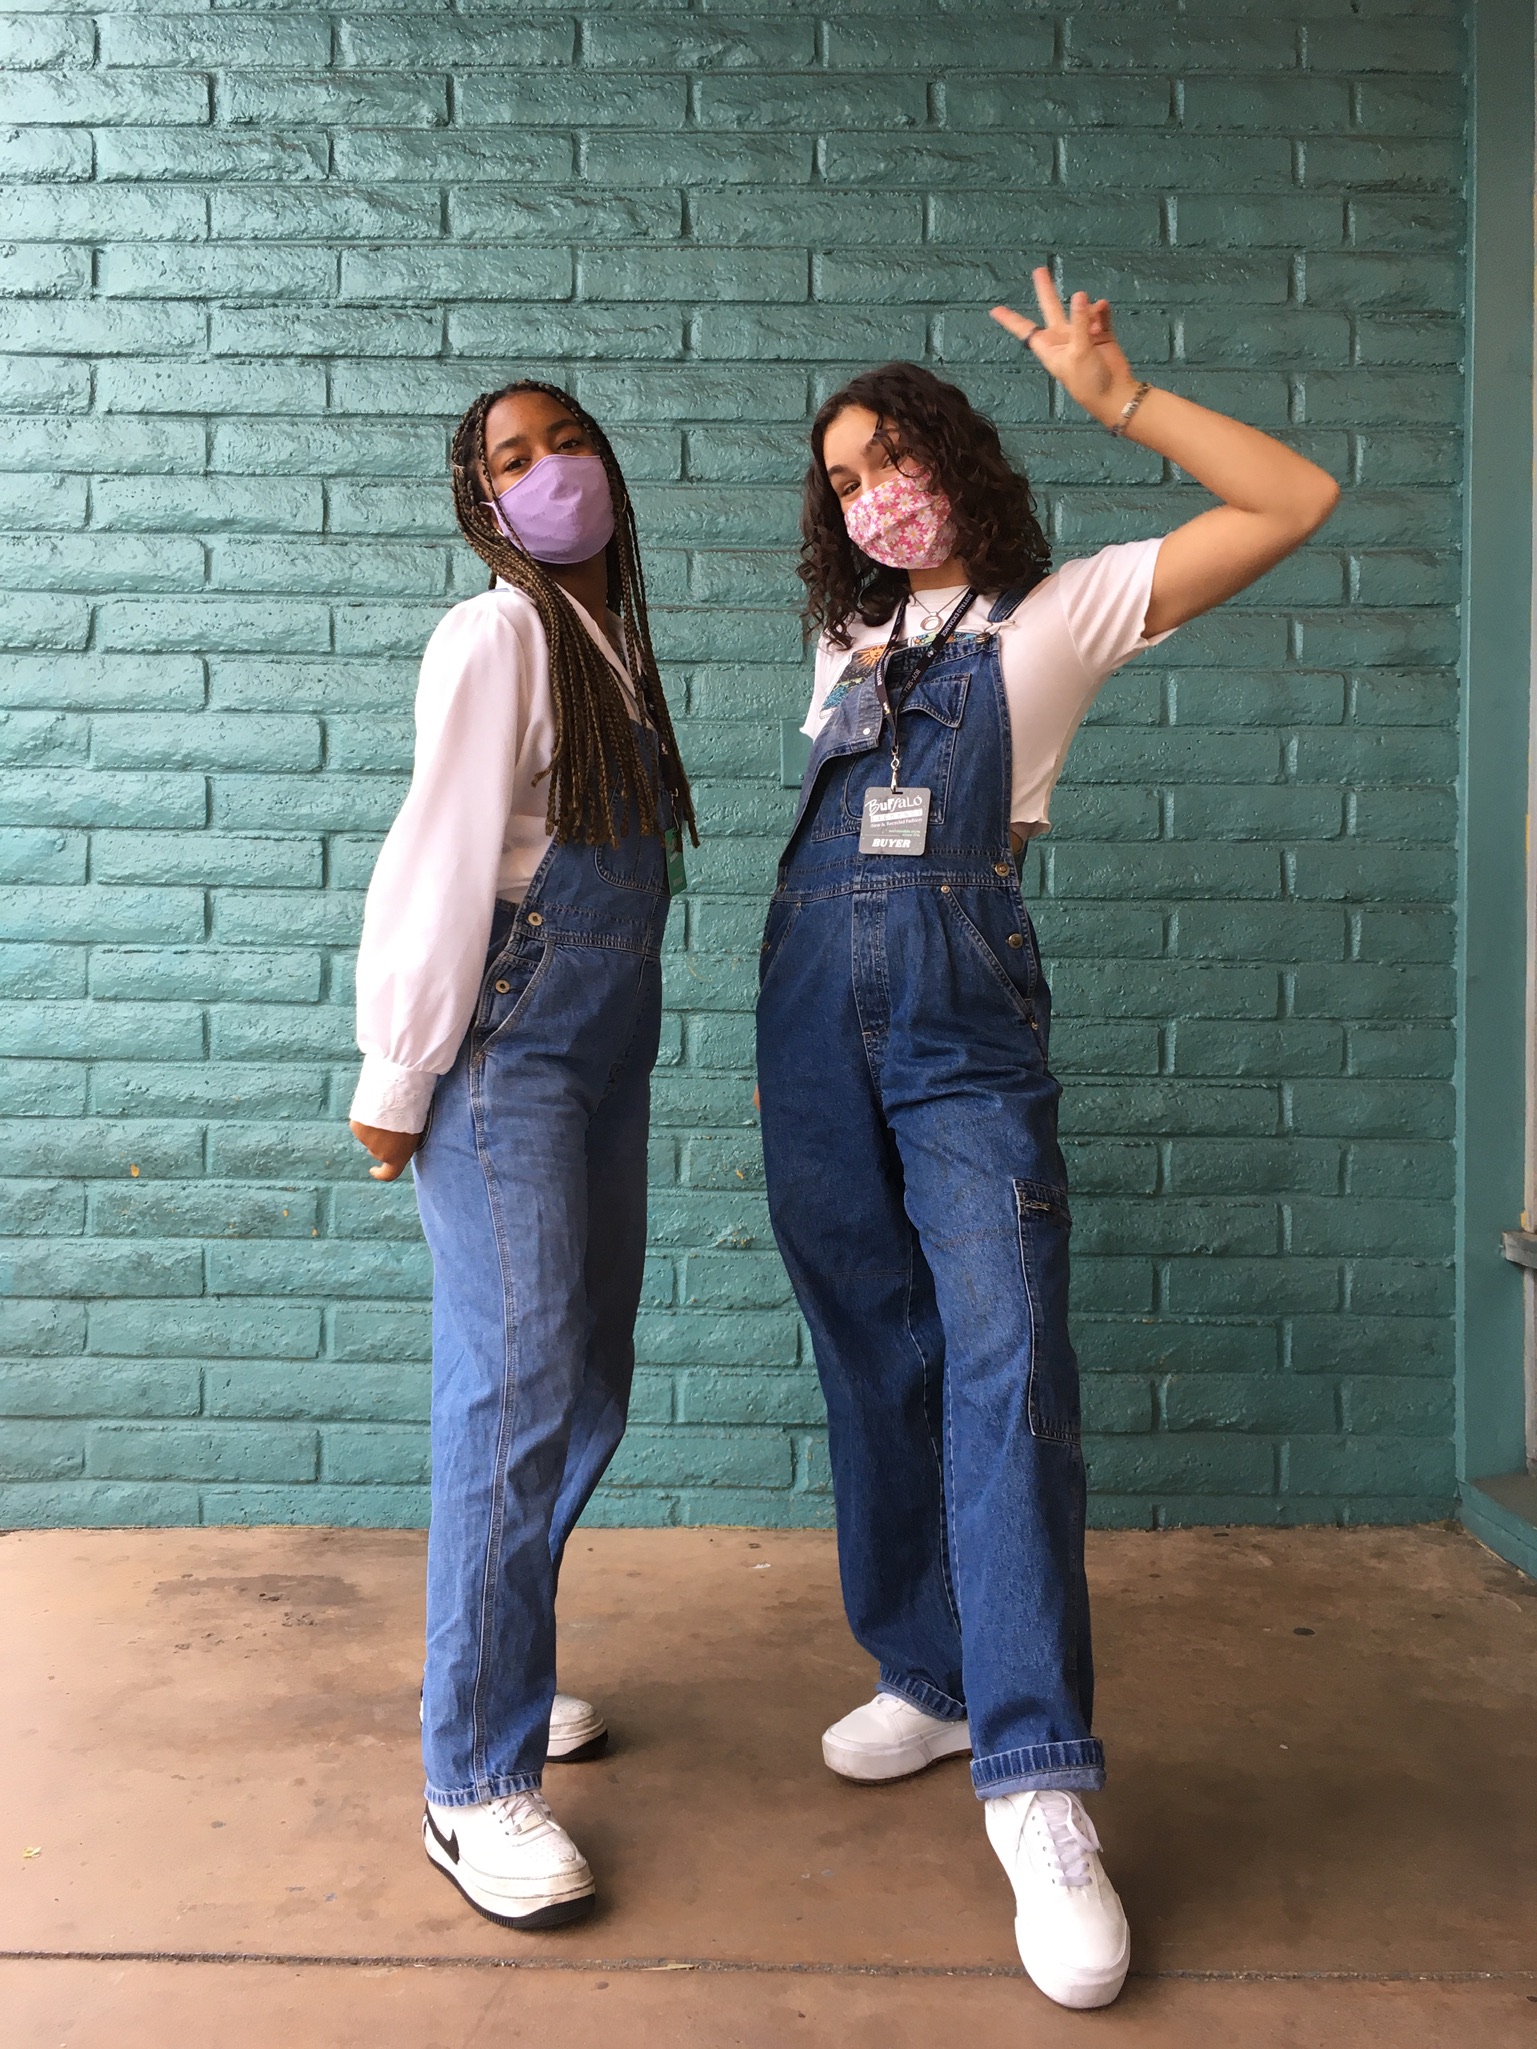 Two people stand posed in front of teal wall wearing denim overalls styled with white t-shirts and sneakers